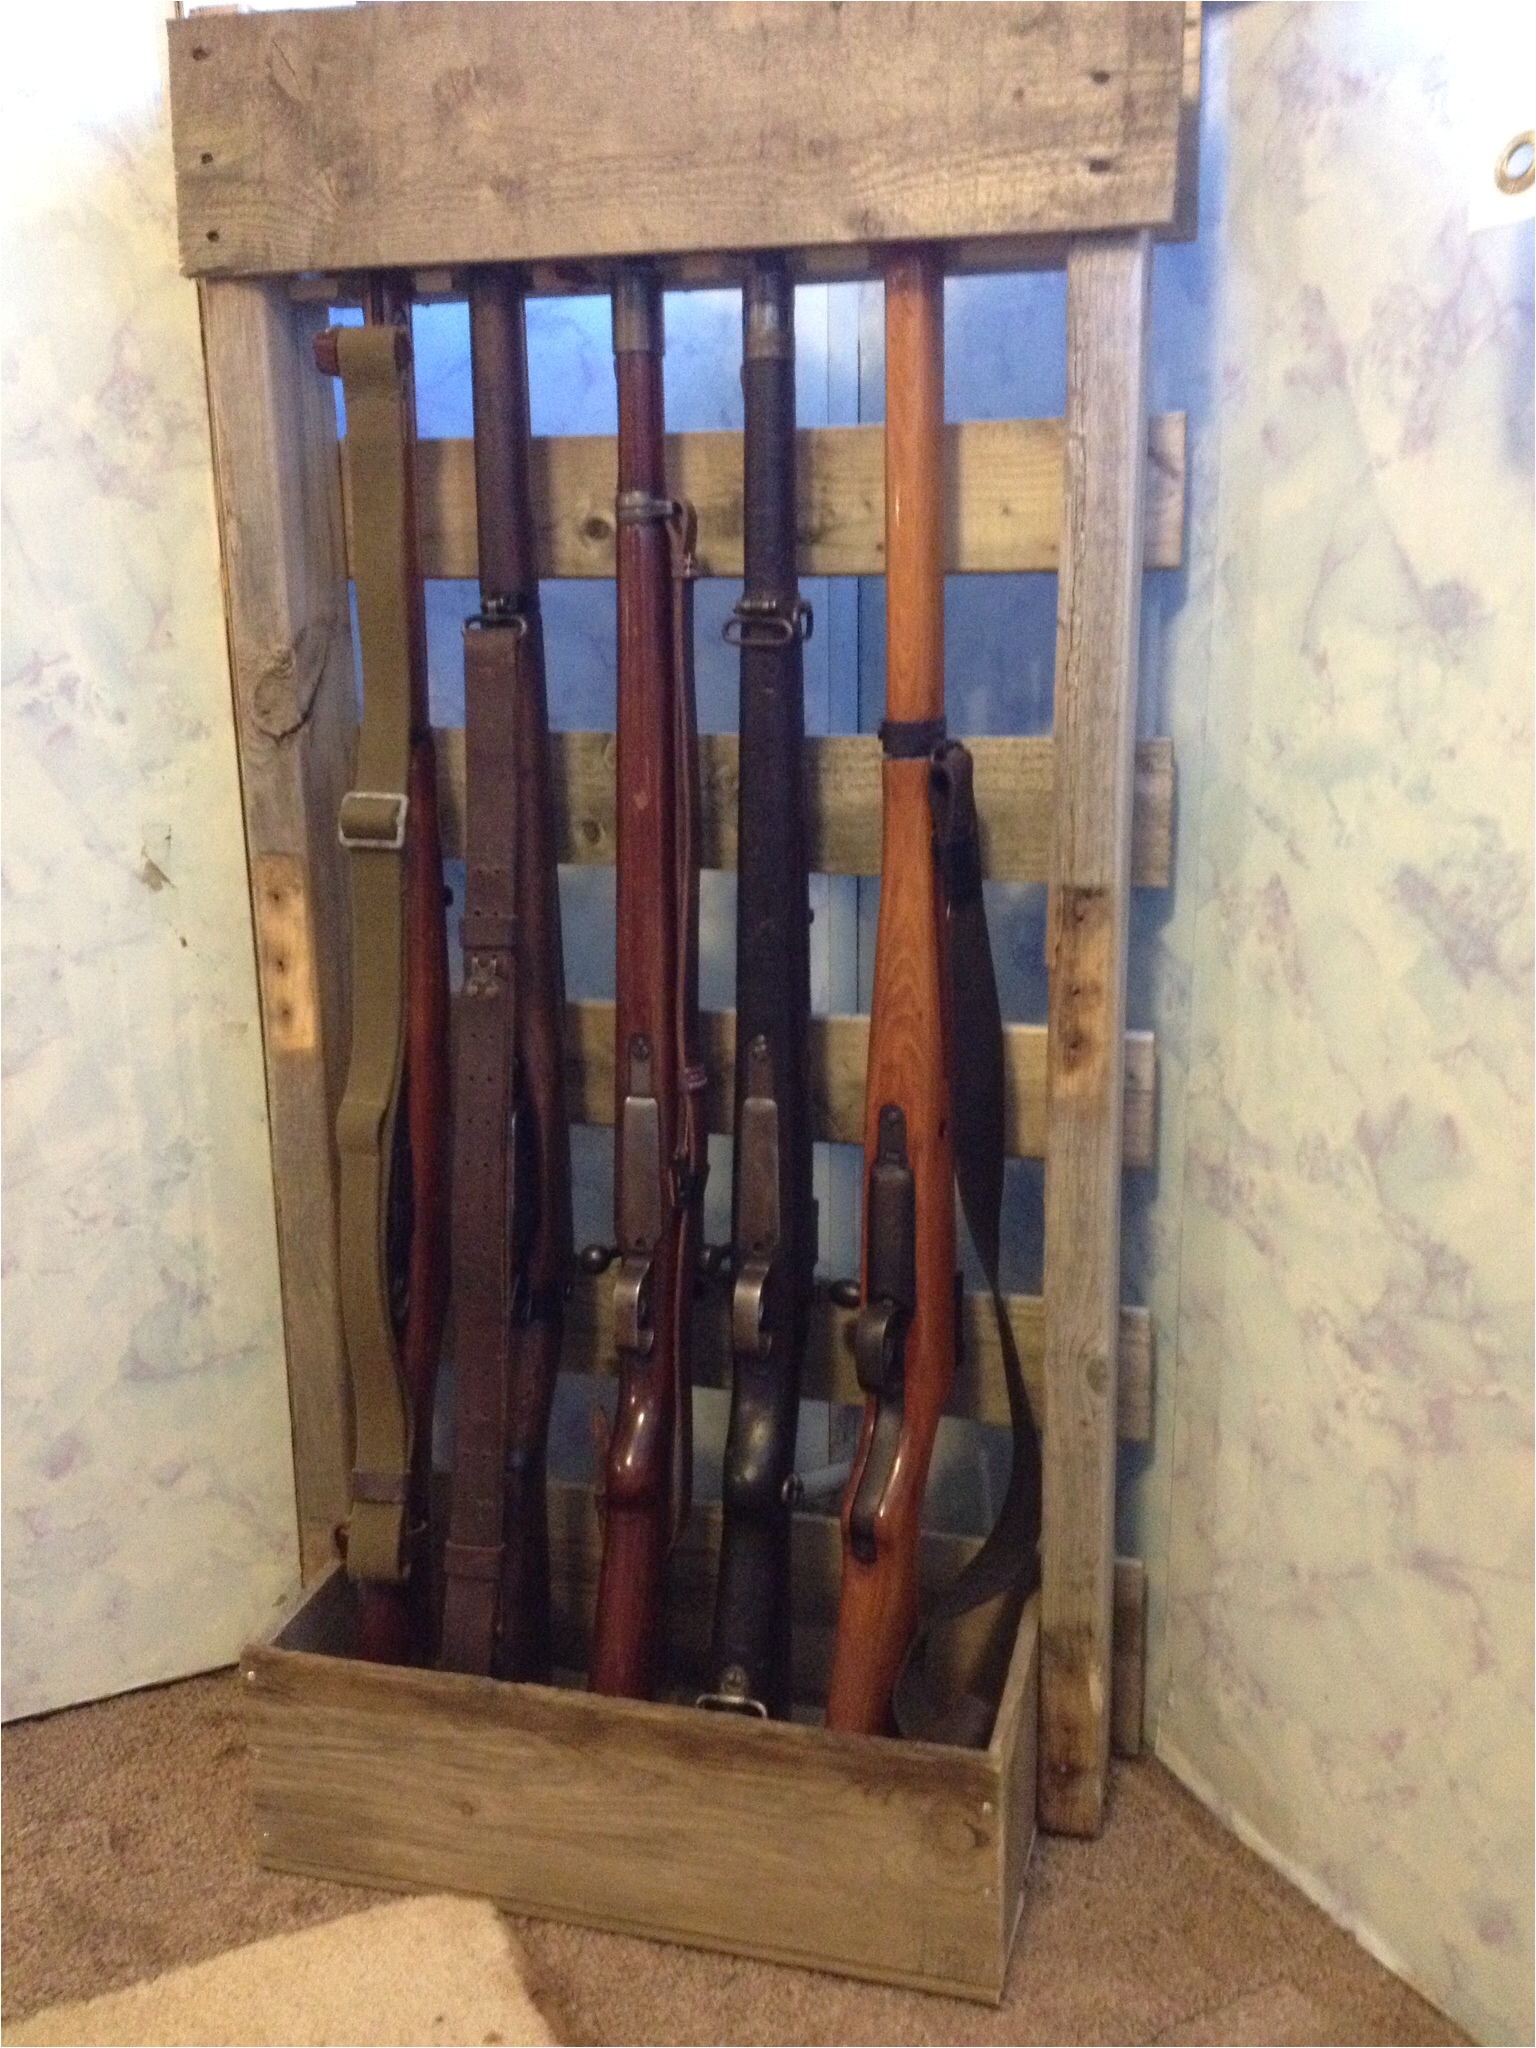 took an old pallet and made a vertical gun rack for my wwii firearms